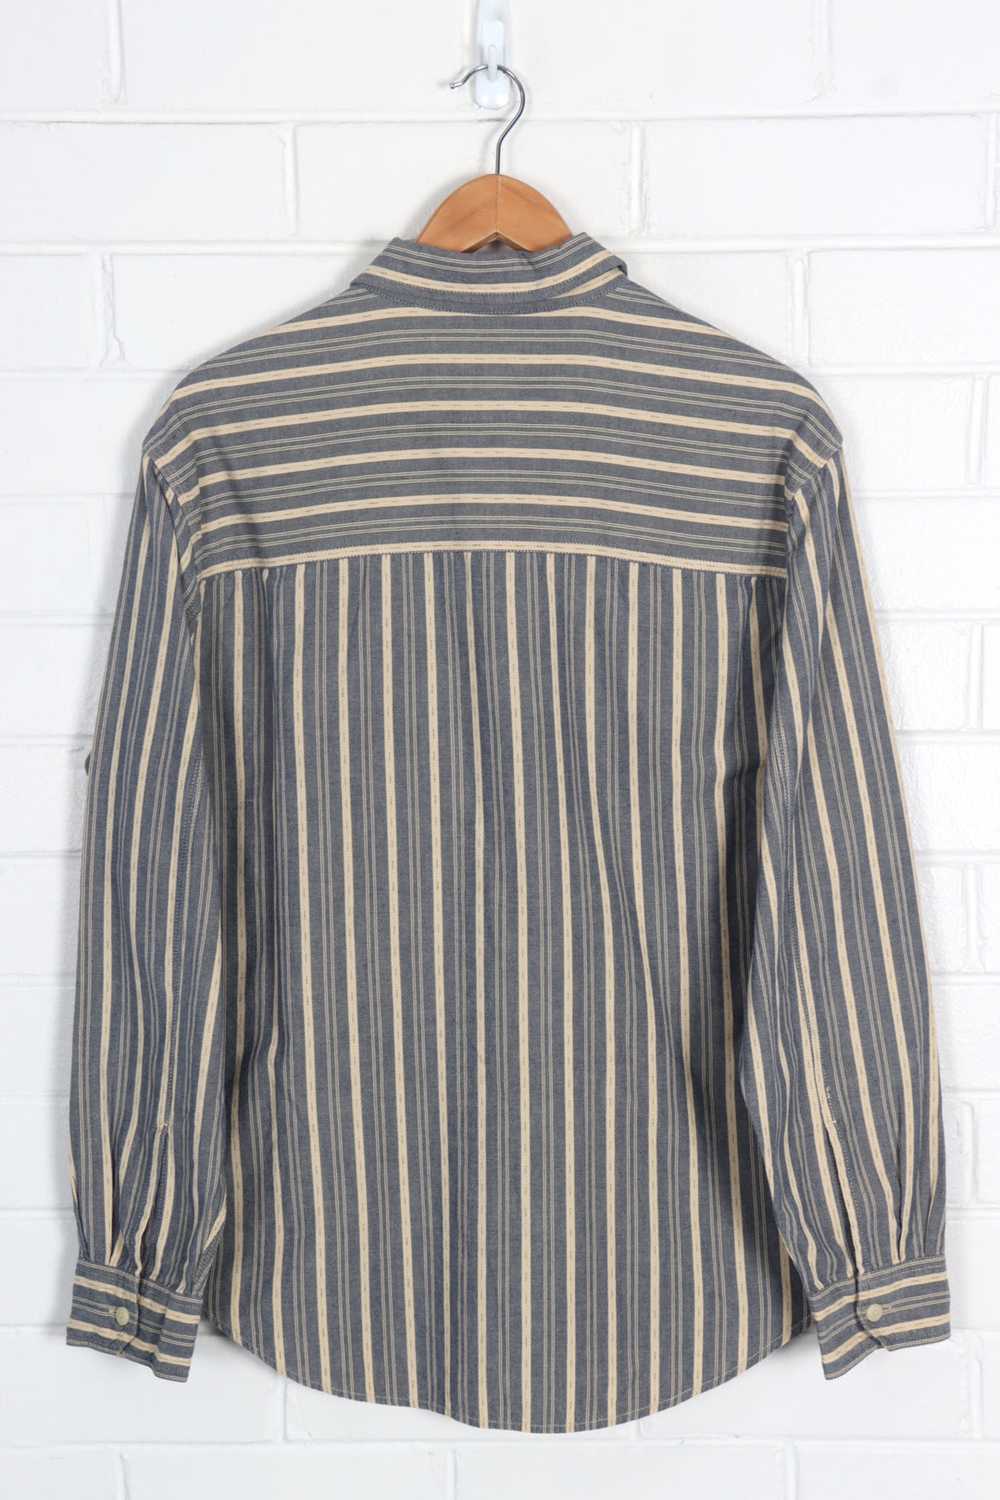 LEVI'S Blue & Beige Striped Button Up Long Sleeve… - image 3